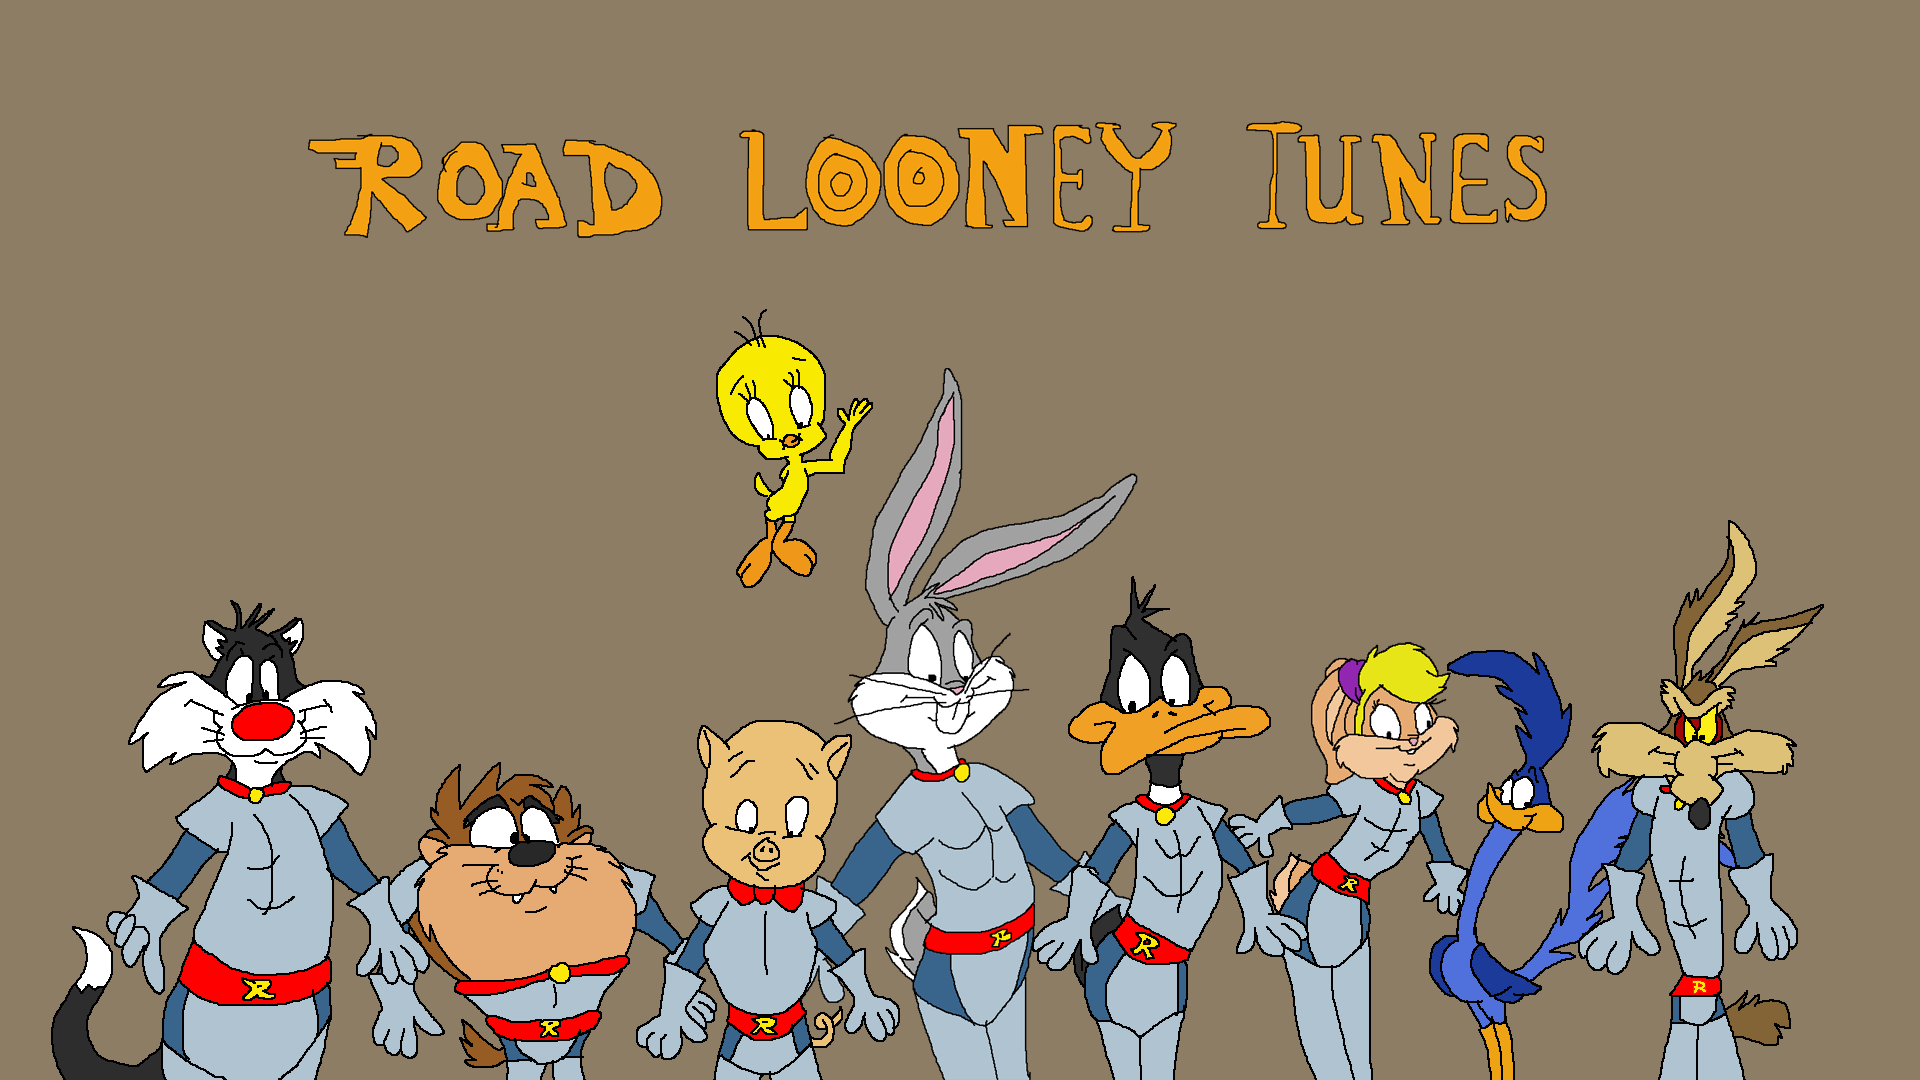 Road Looney Tunes by TomArmstrong20 on DeviantArt